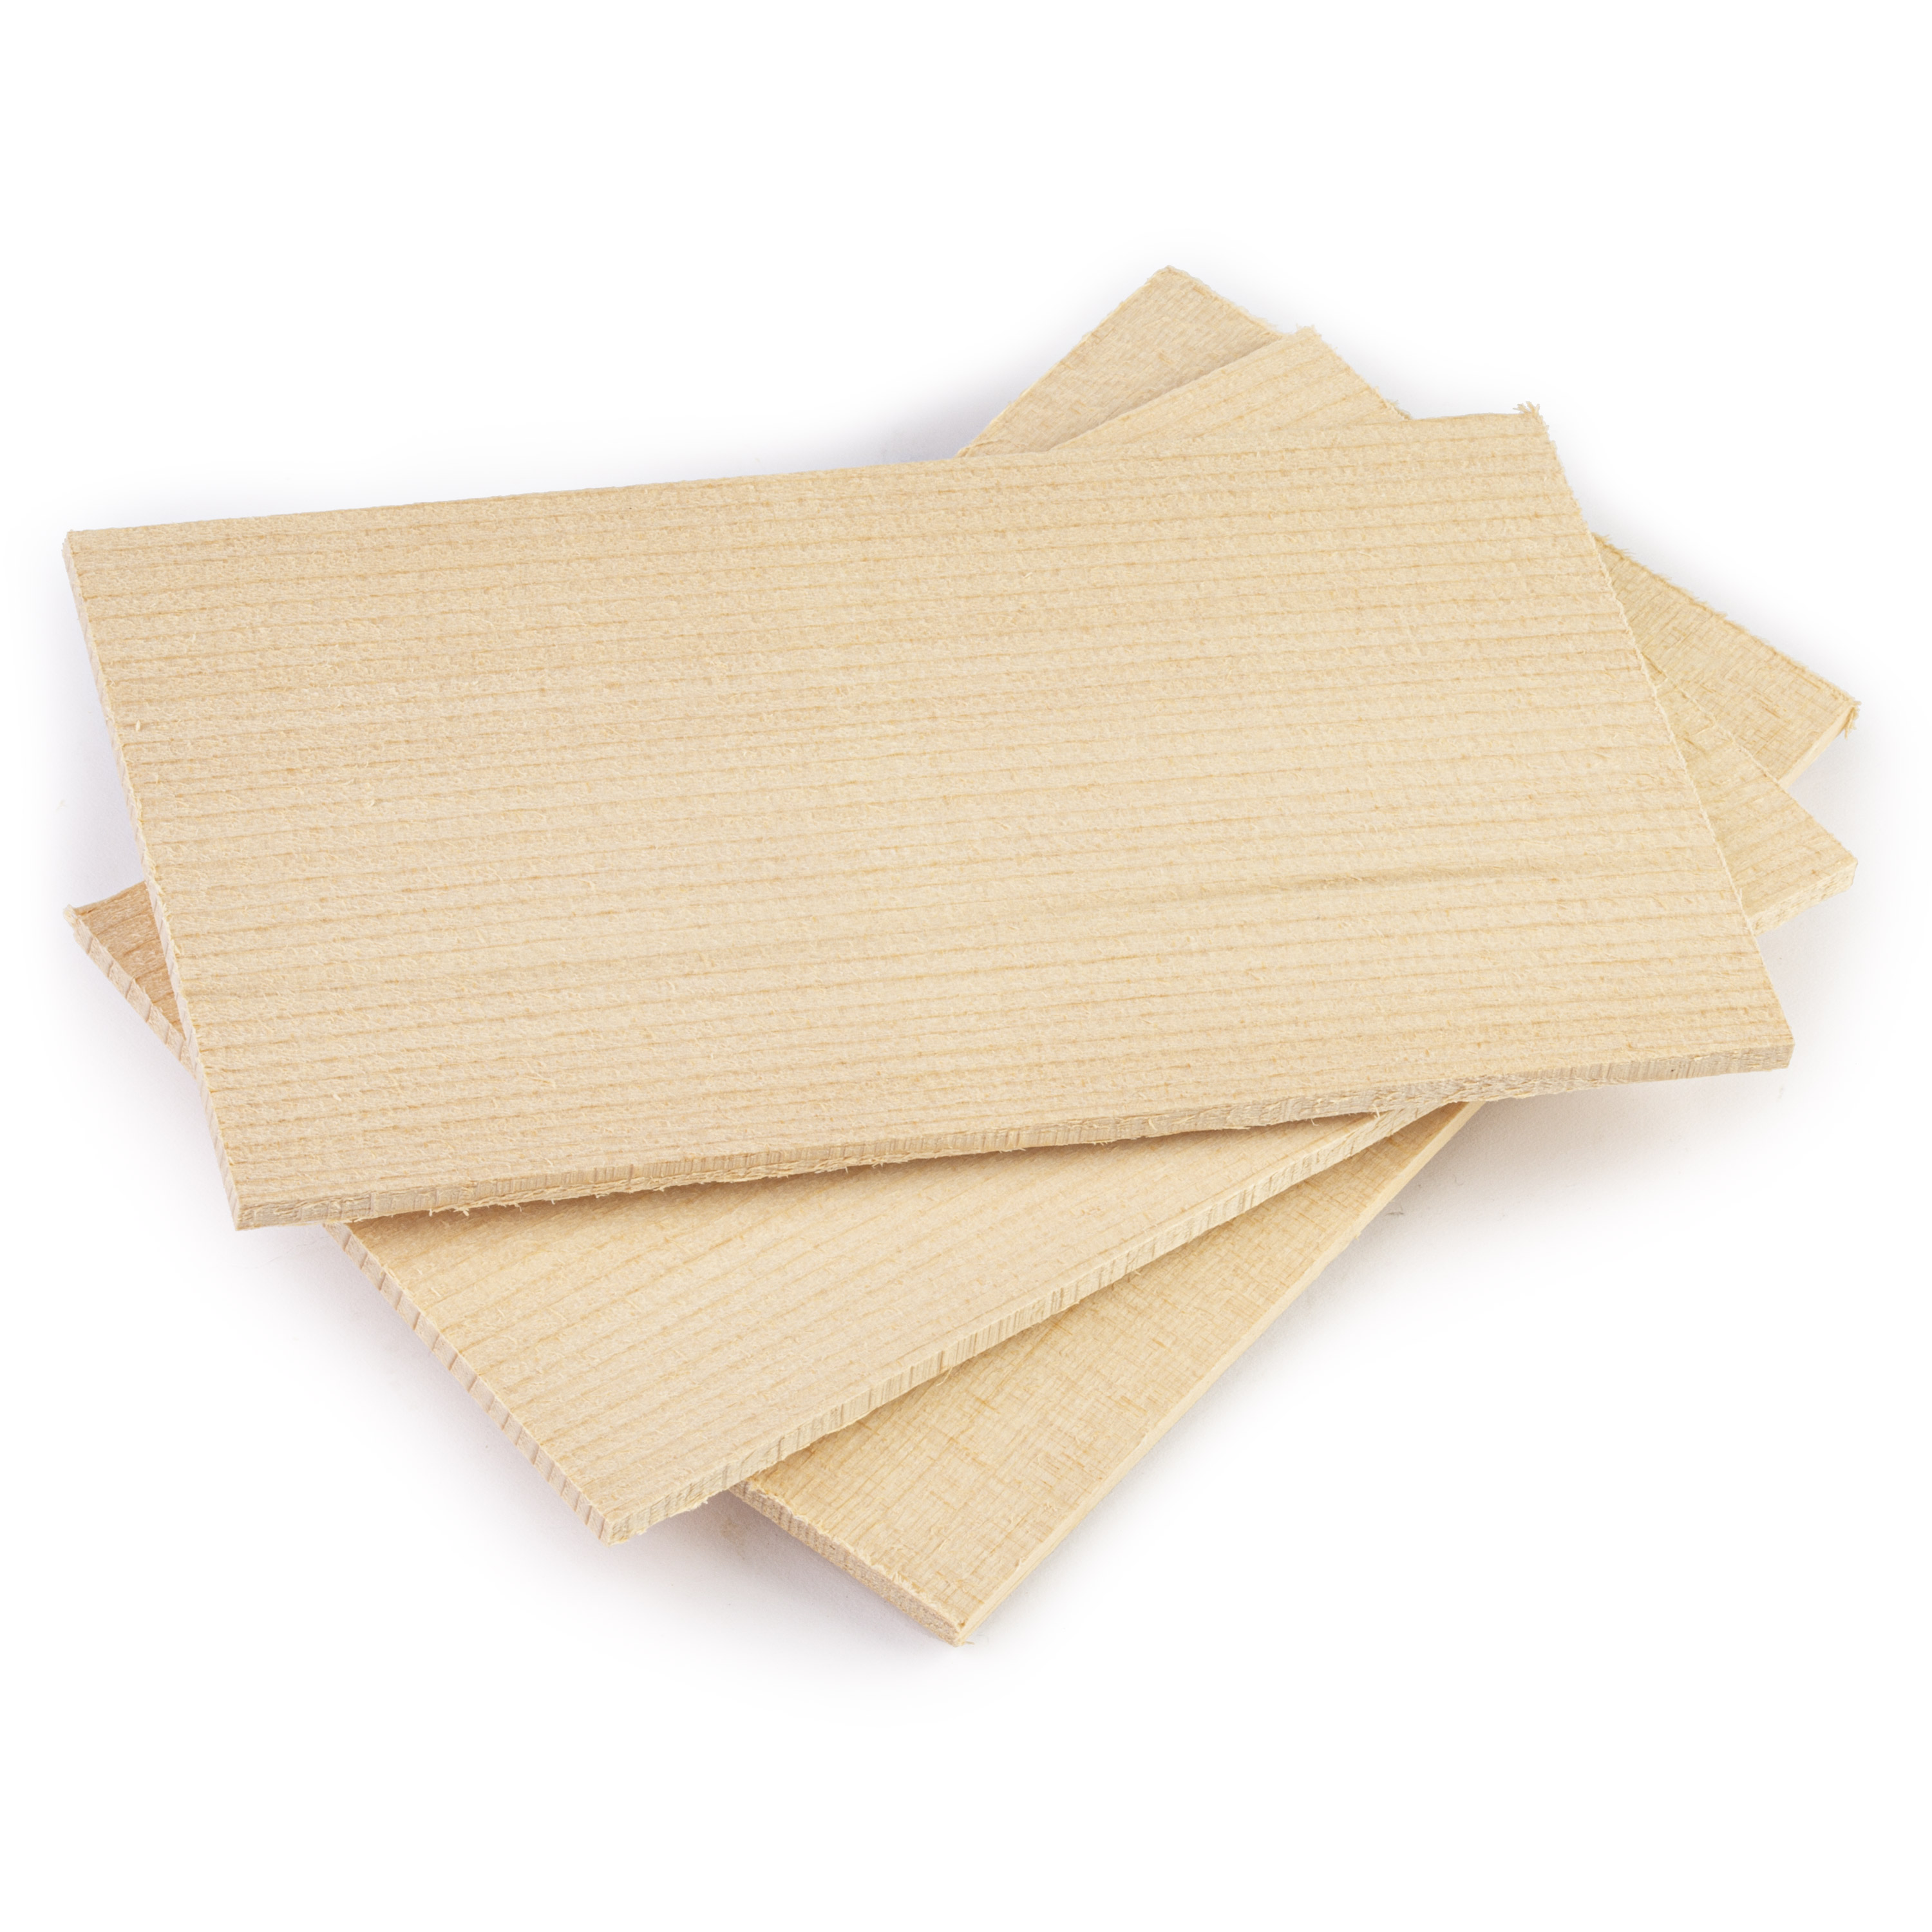 Spruce Patching Wood - Set of 3